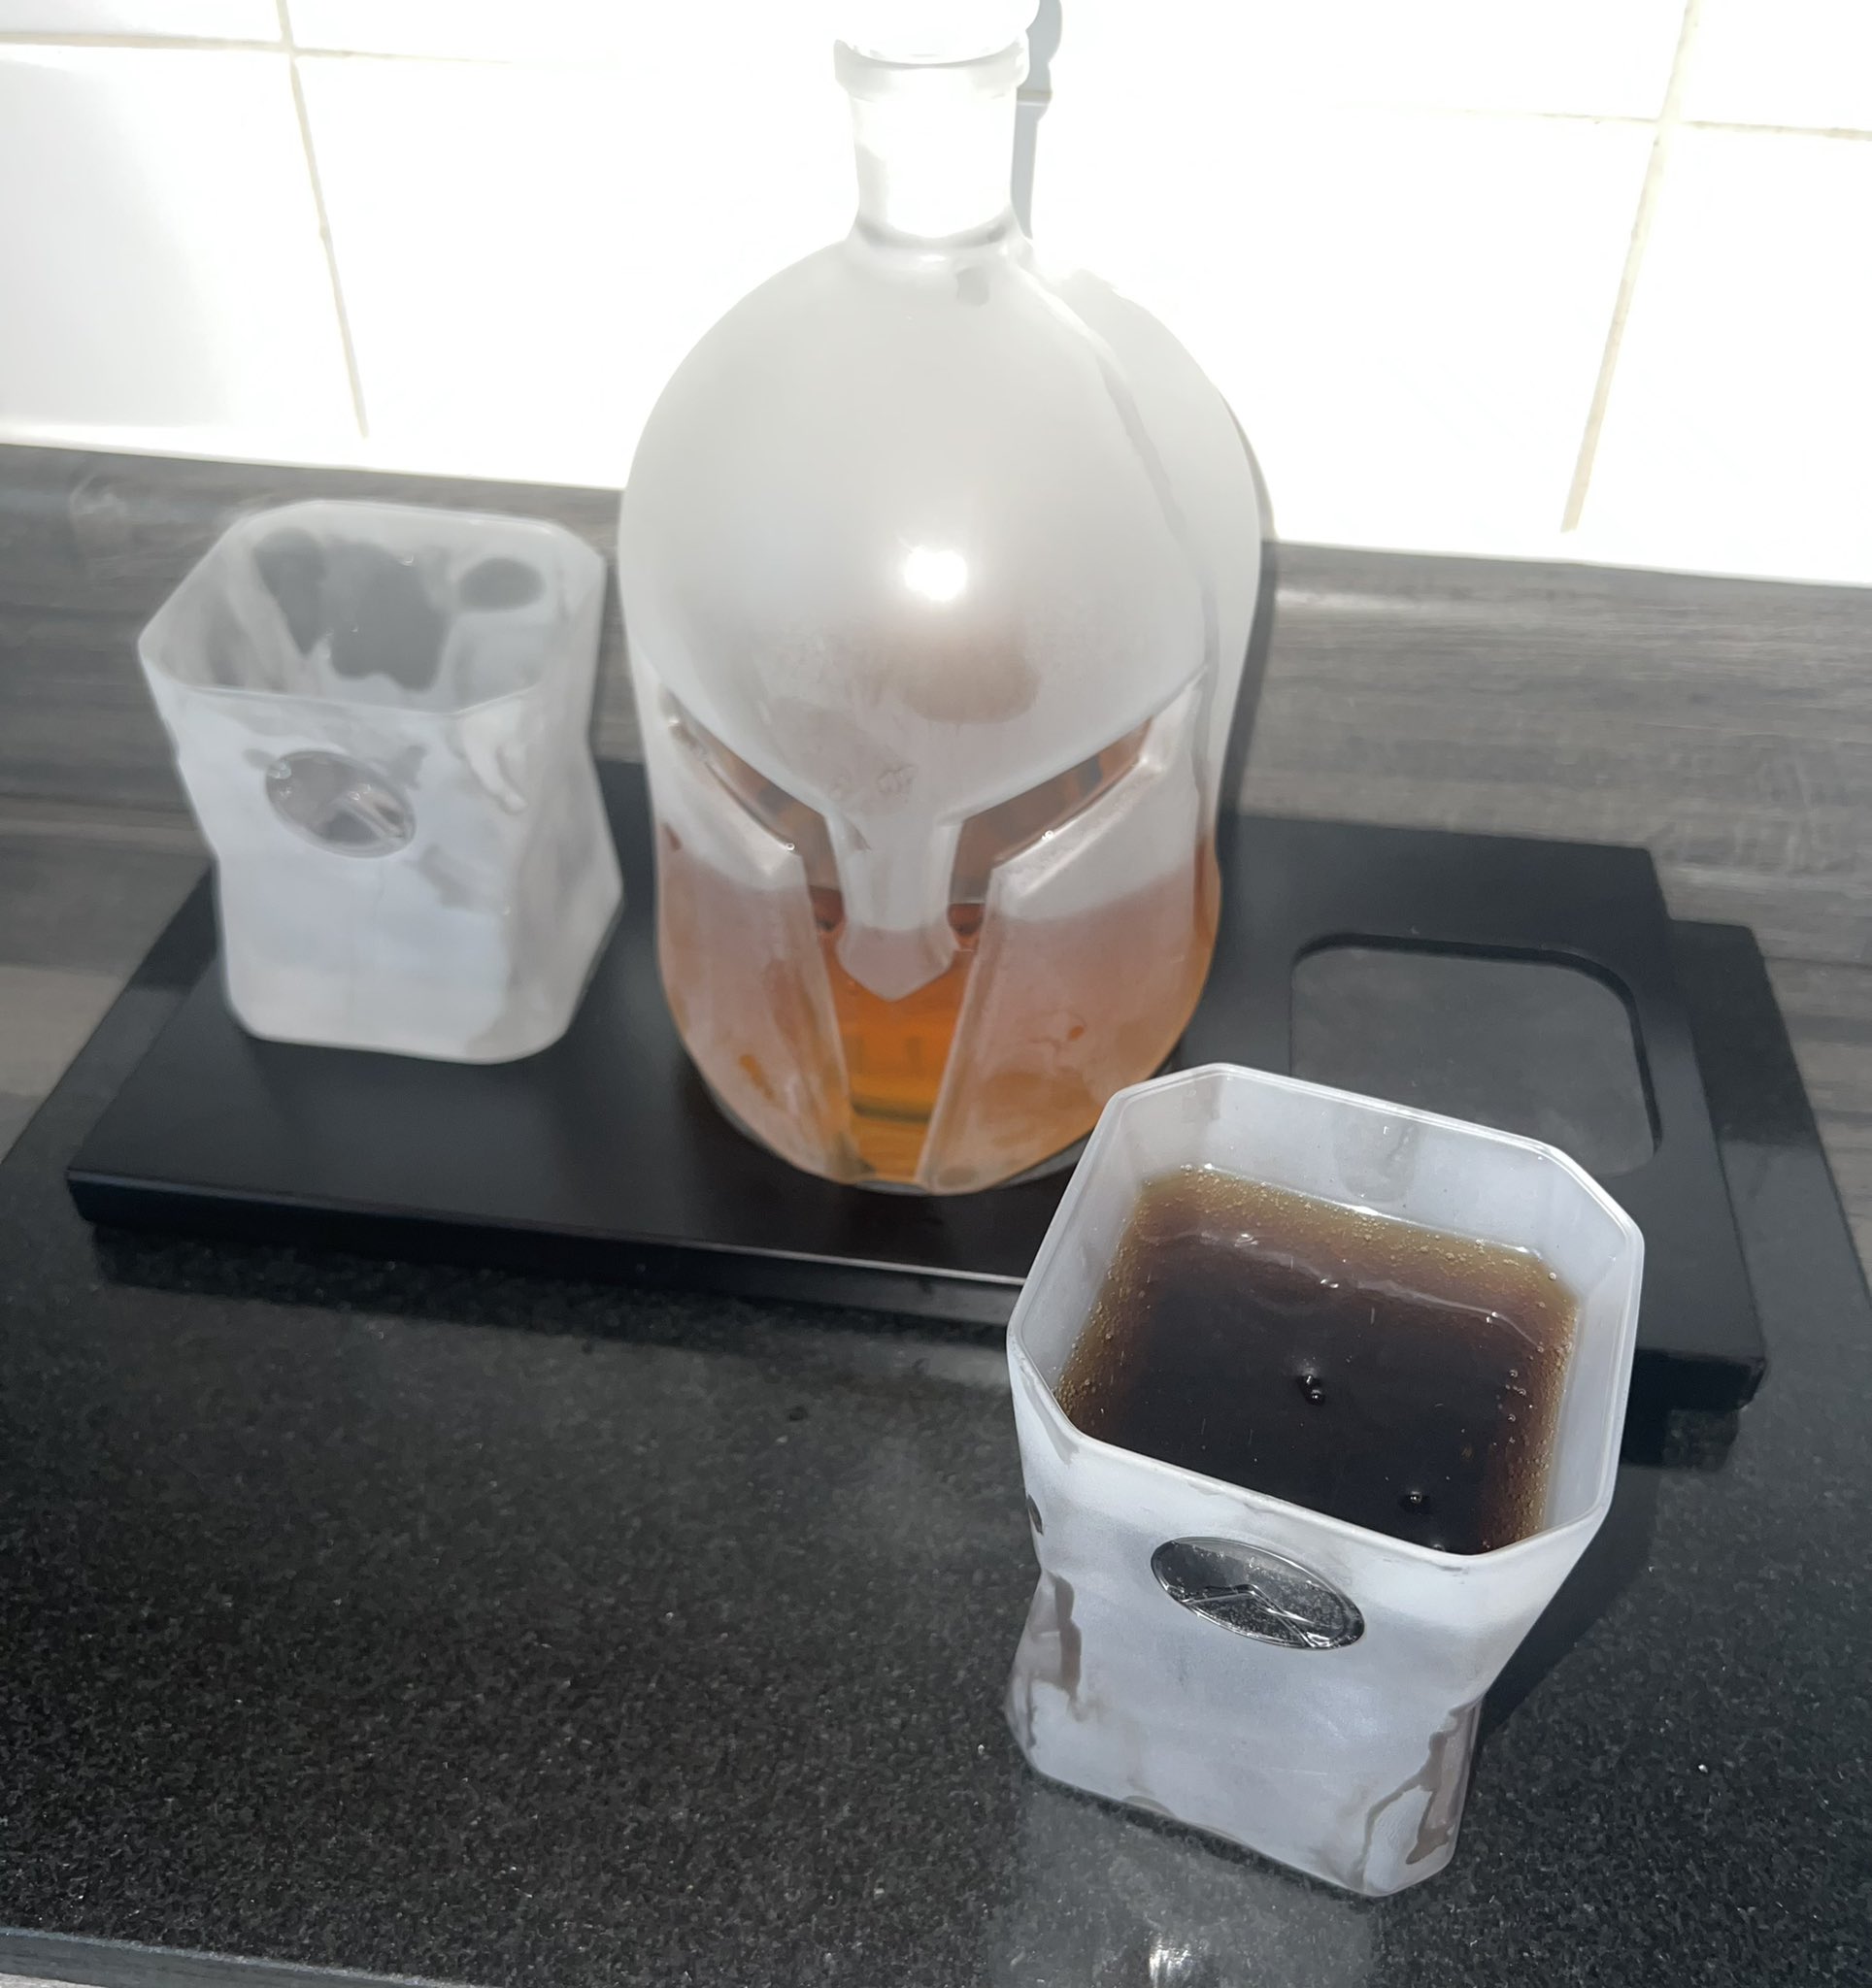 Wolf Whiskey - The Spartan Edition decanter set: ON SALE. Use code  THISISSPARTA22 for free UK delivery. * * * * #Quote #Inspiration #Whisky  #Decanter #WhiskyDecanter #300 #StartUp #NewBusiness #ForTheBoys  #WolfWhiskey #LeadThePack #